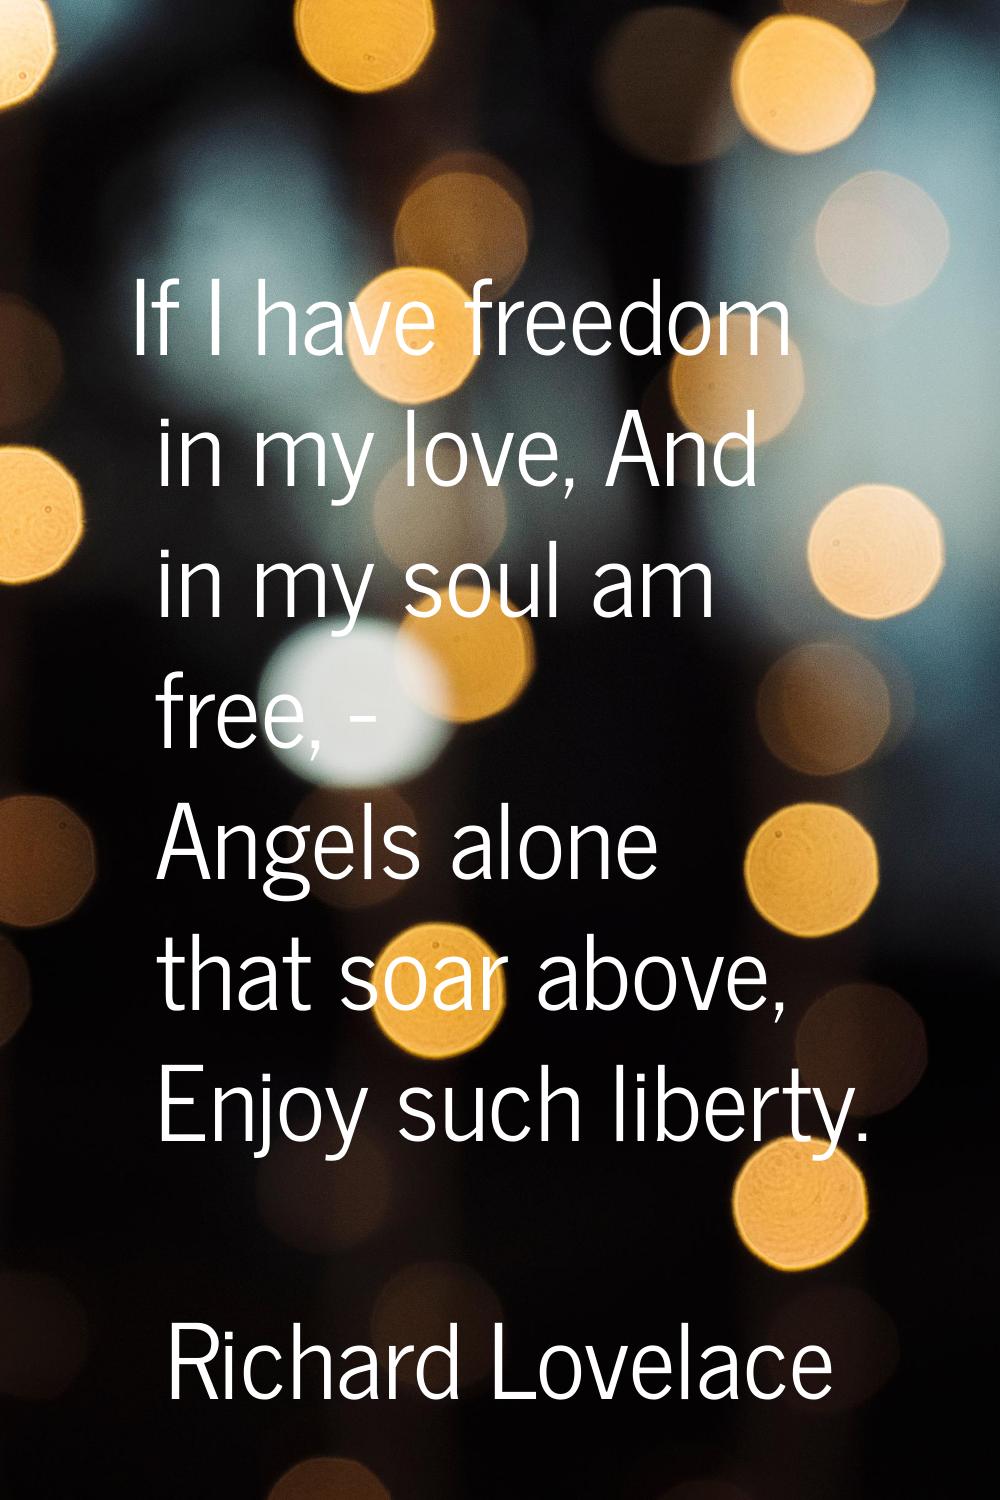 If I have freedom in my love, And in my soul am free, - Angels alone that soar above, Enjoy such li